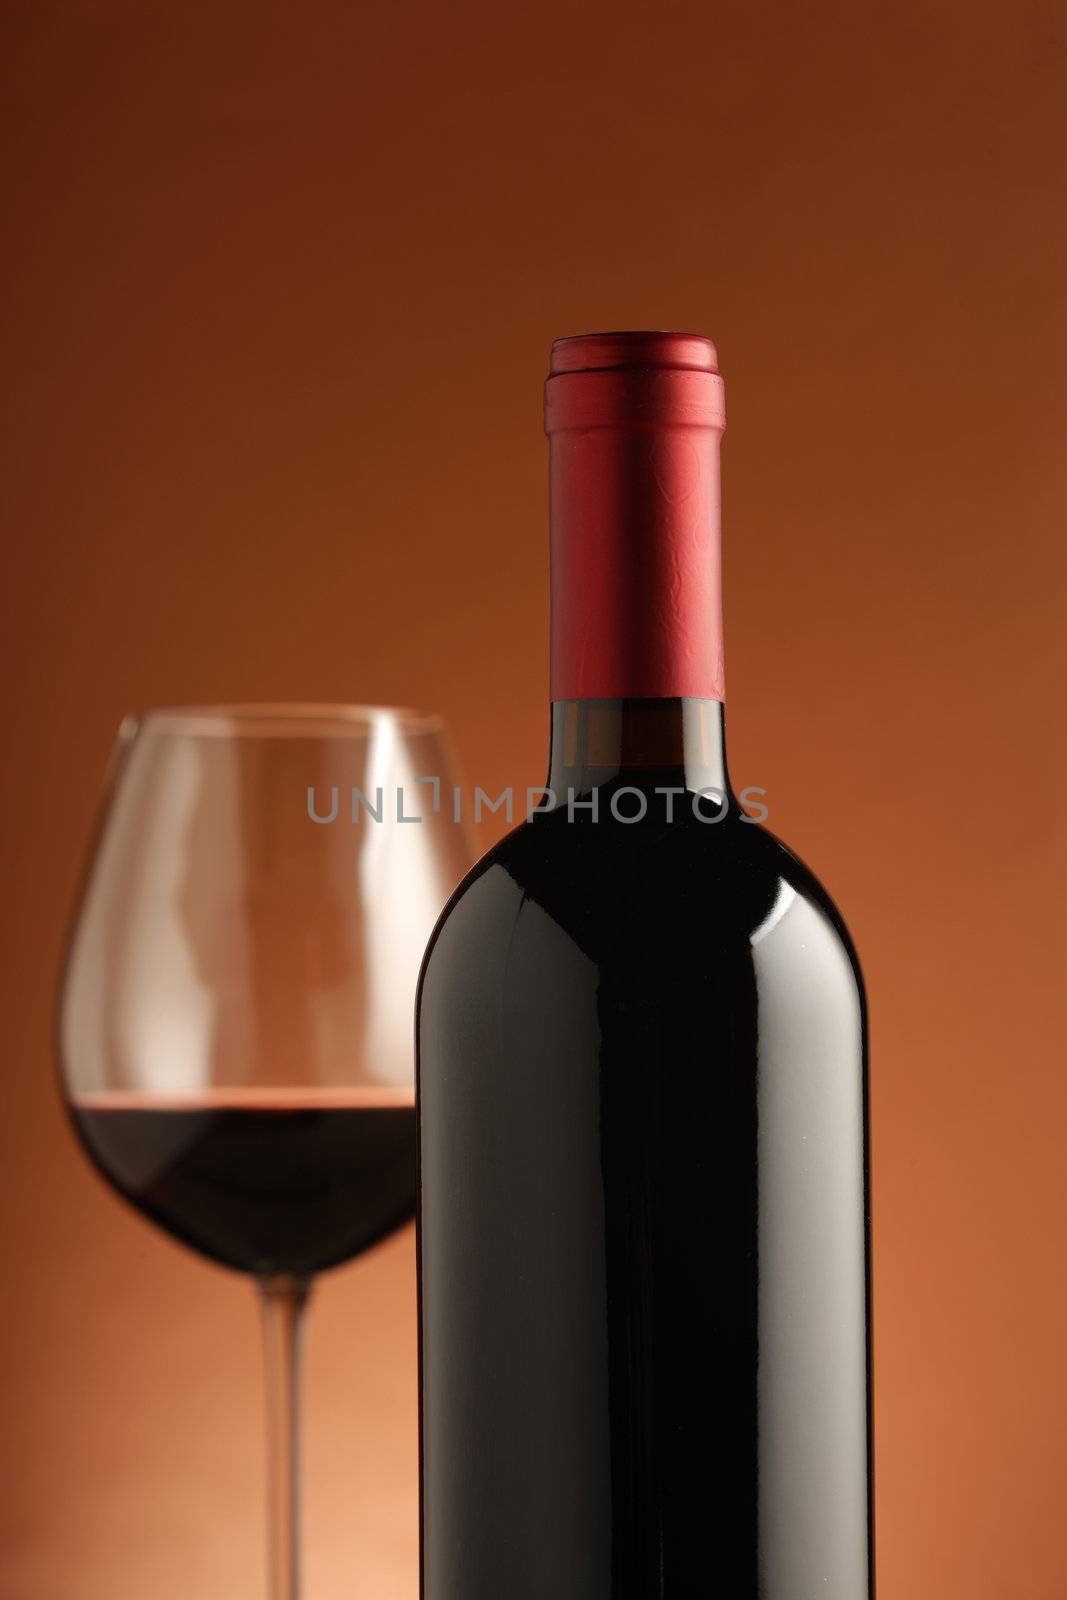 red wine bottle and glass